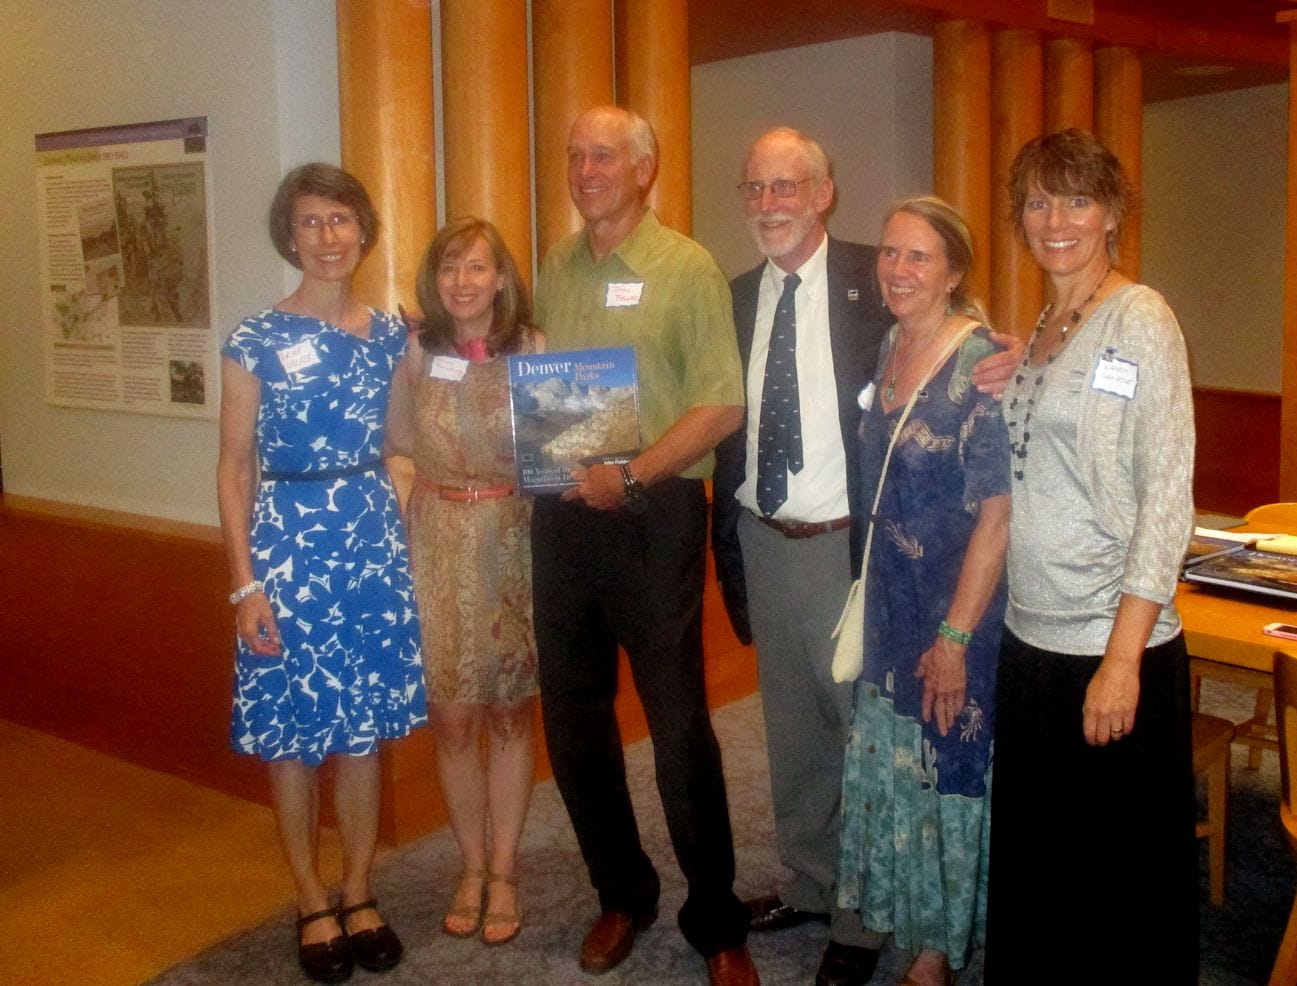 At the Denver Public Library, from left: Erika Walker, editor Jenna Browning, John Fielder, Bart Berger, Sally White, and Wendy Rex-Atzet. 